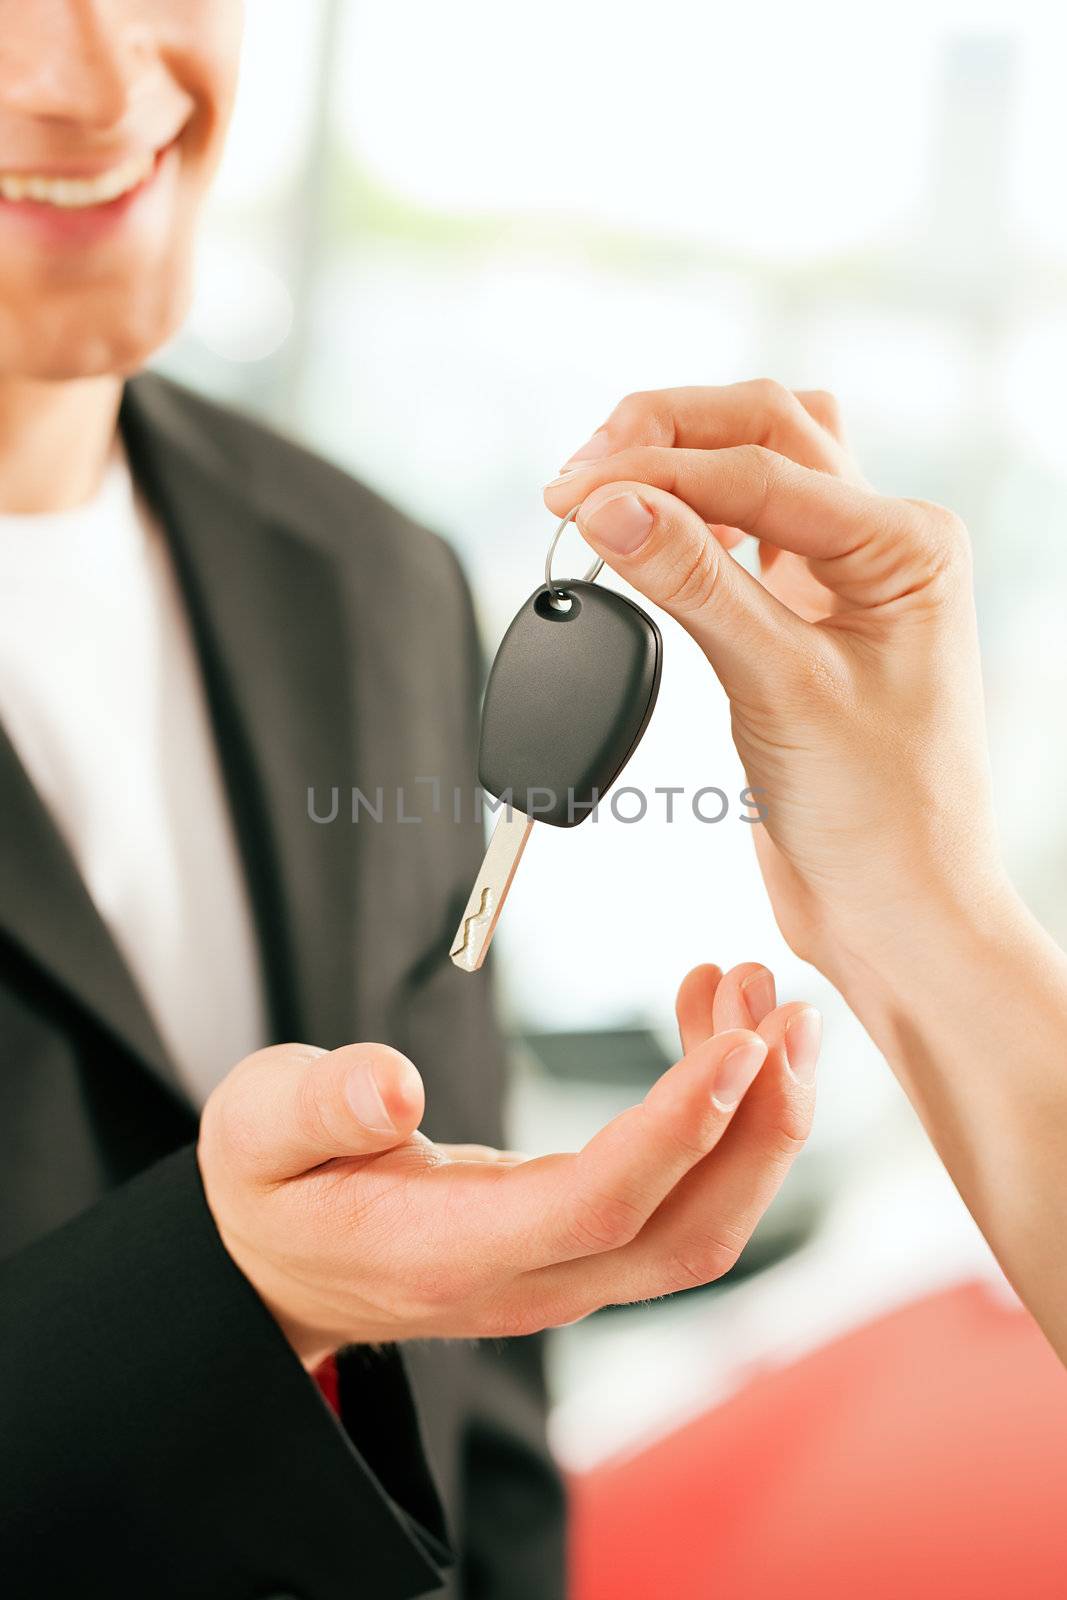 Man at a car dealership buying an auto, the female sales rep giving him the key, macro shot with focus on hands and key